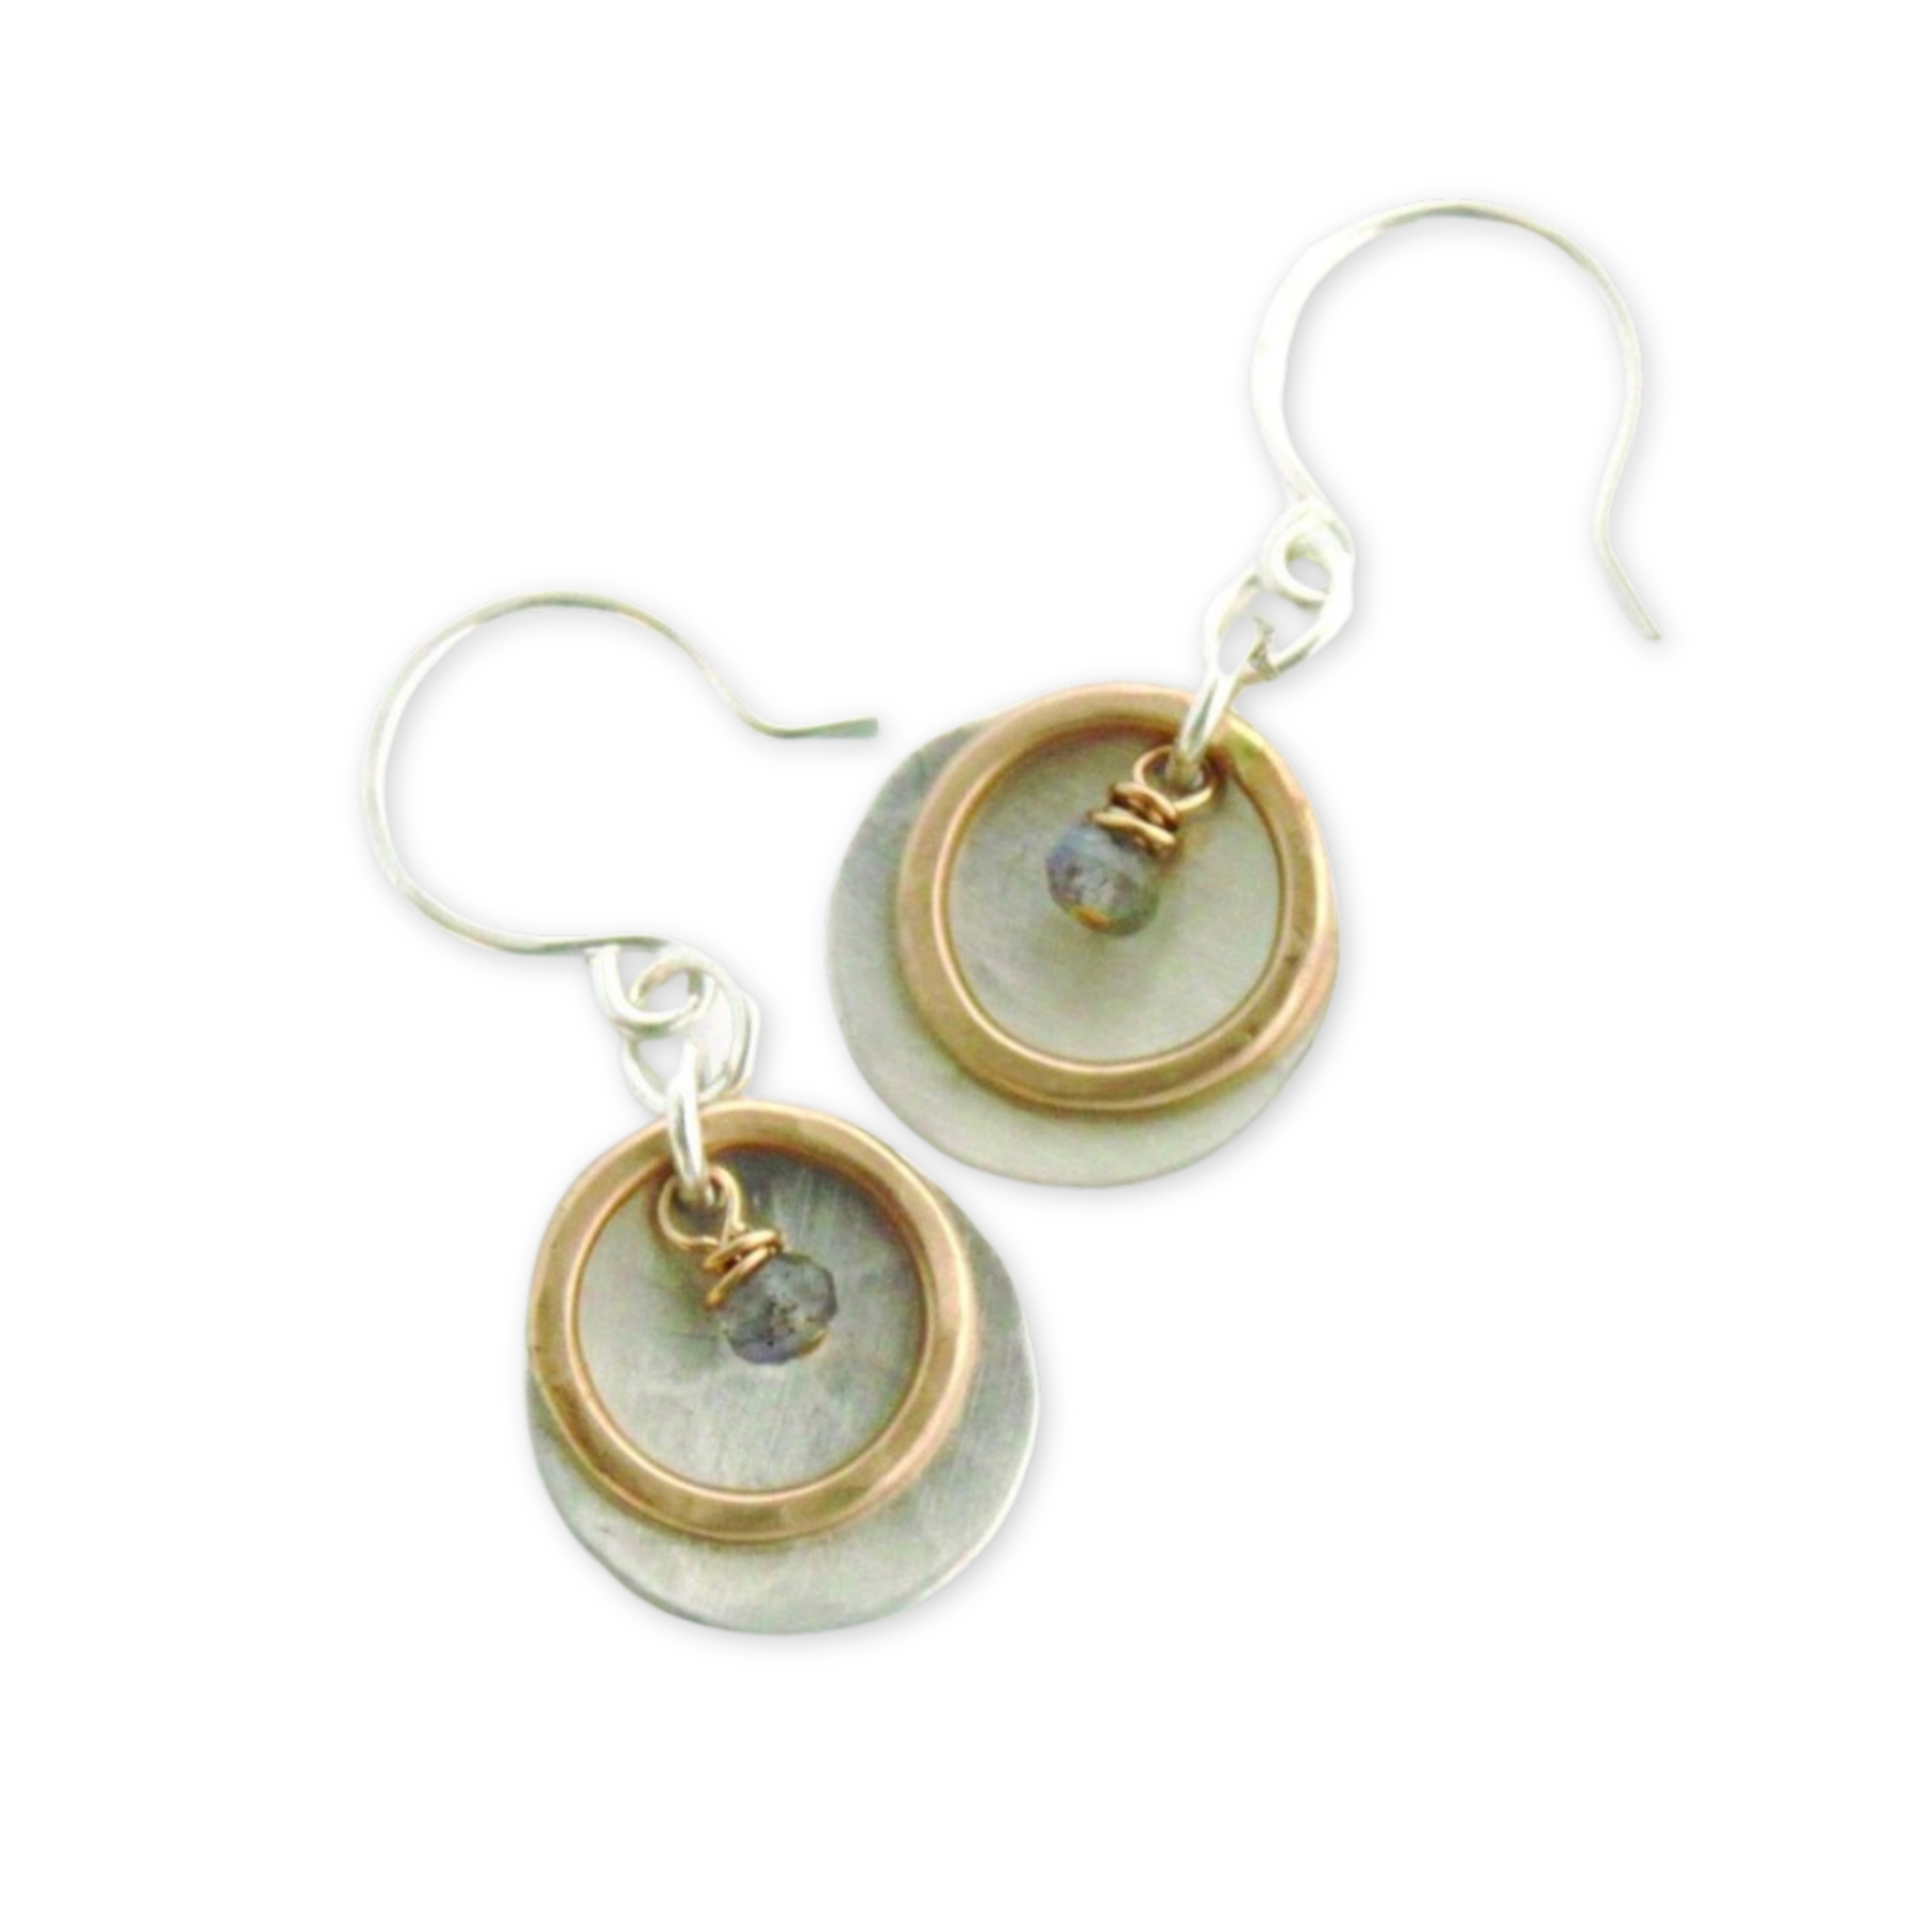 a pair of earrings with a round disc and a circle and a hanging bead